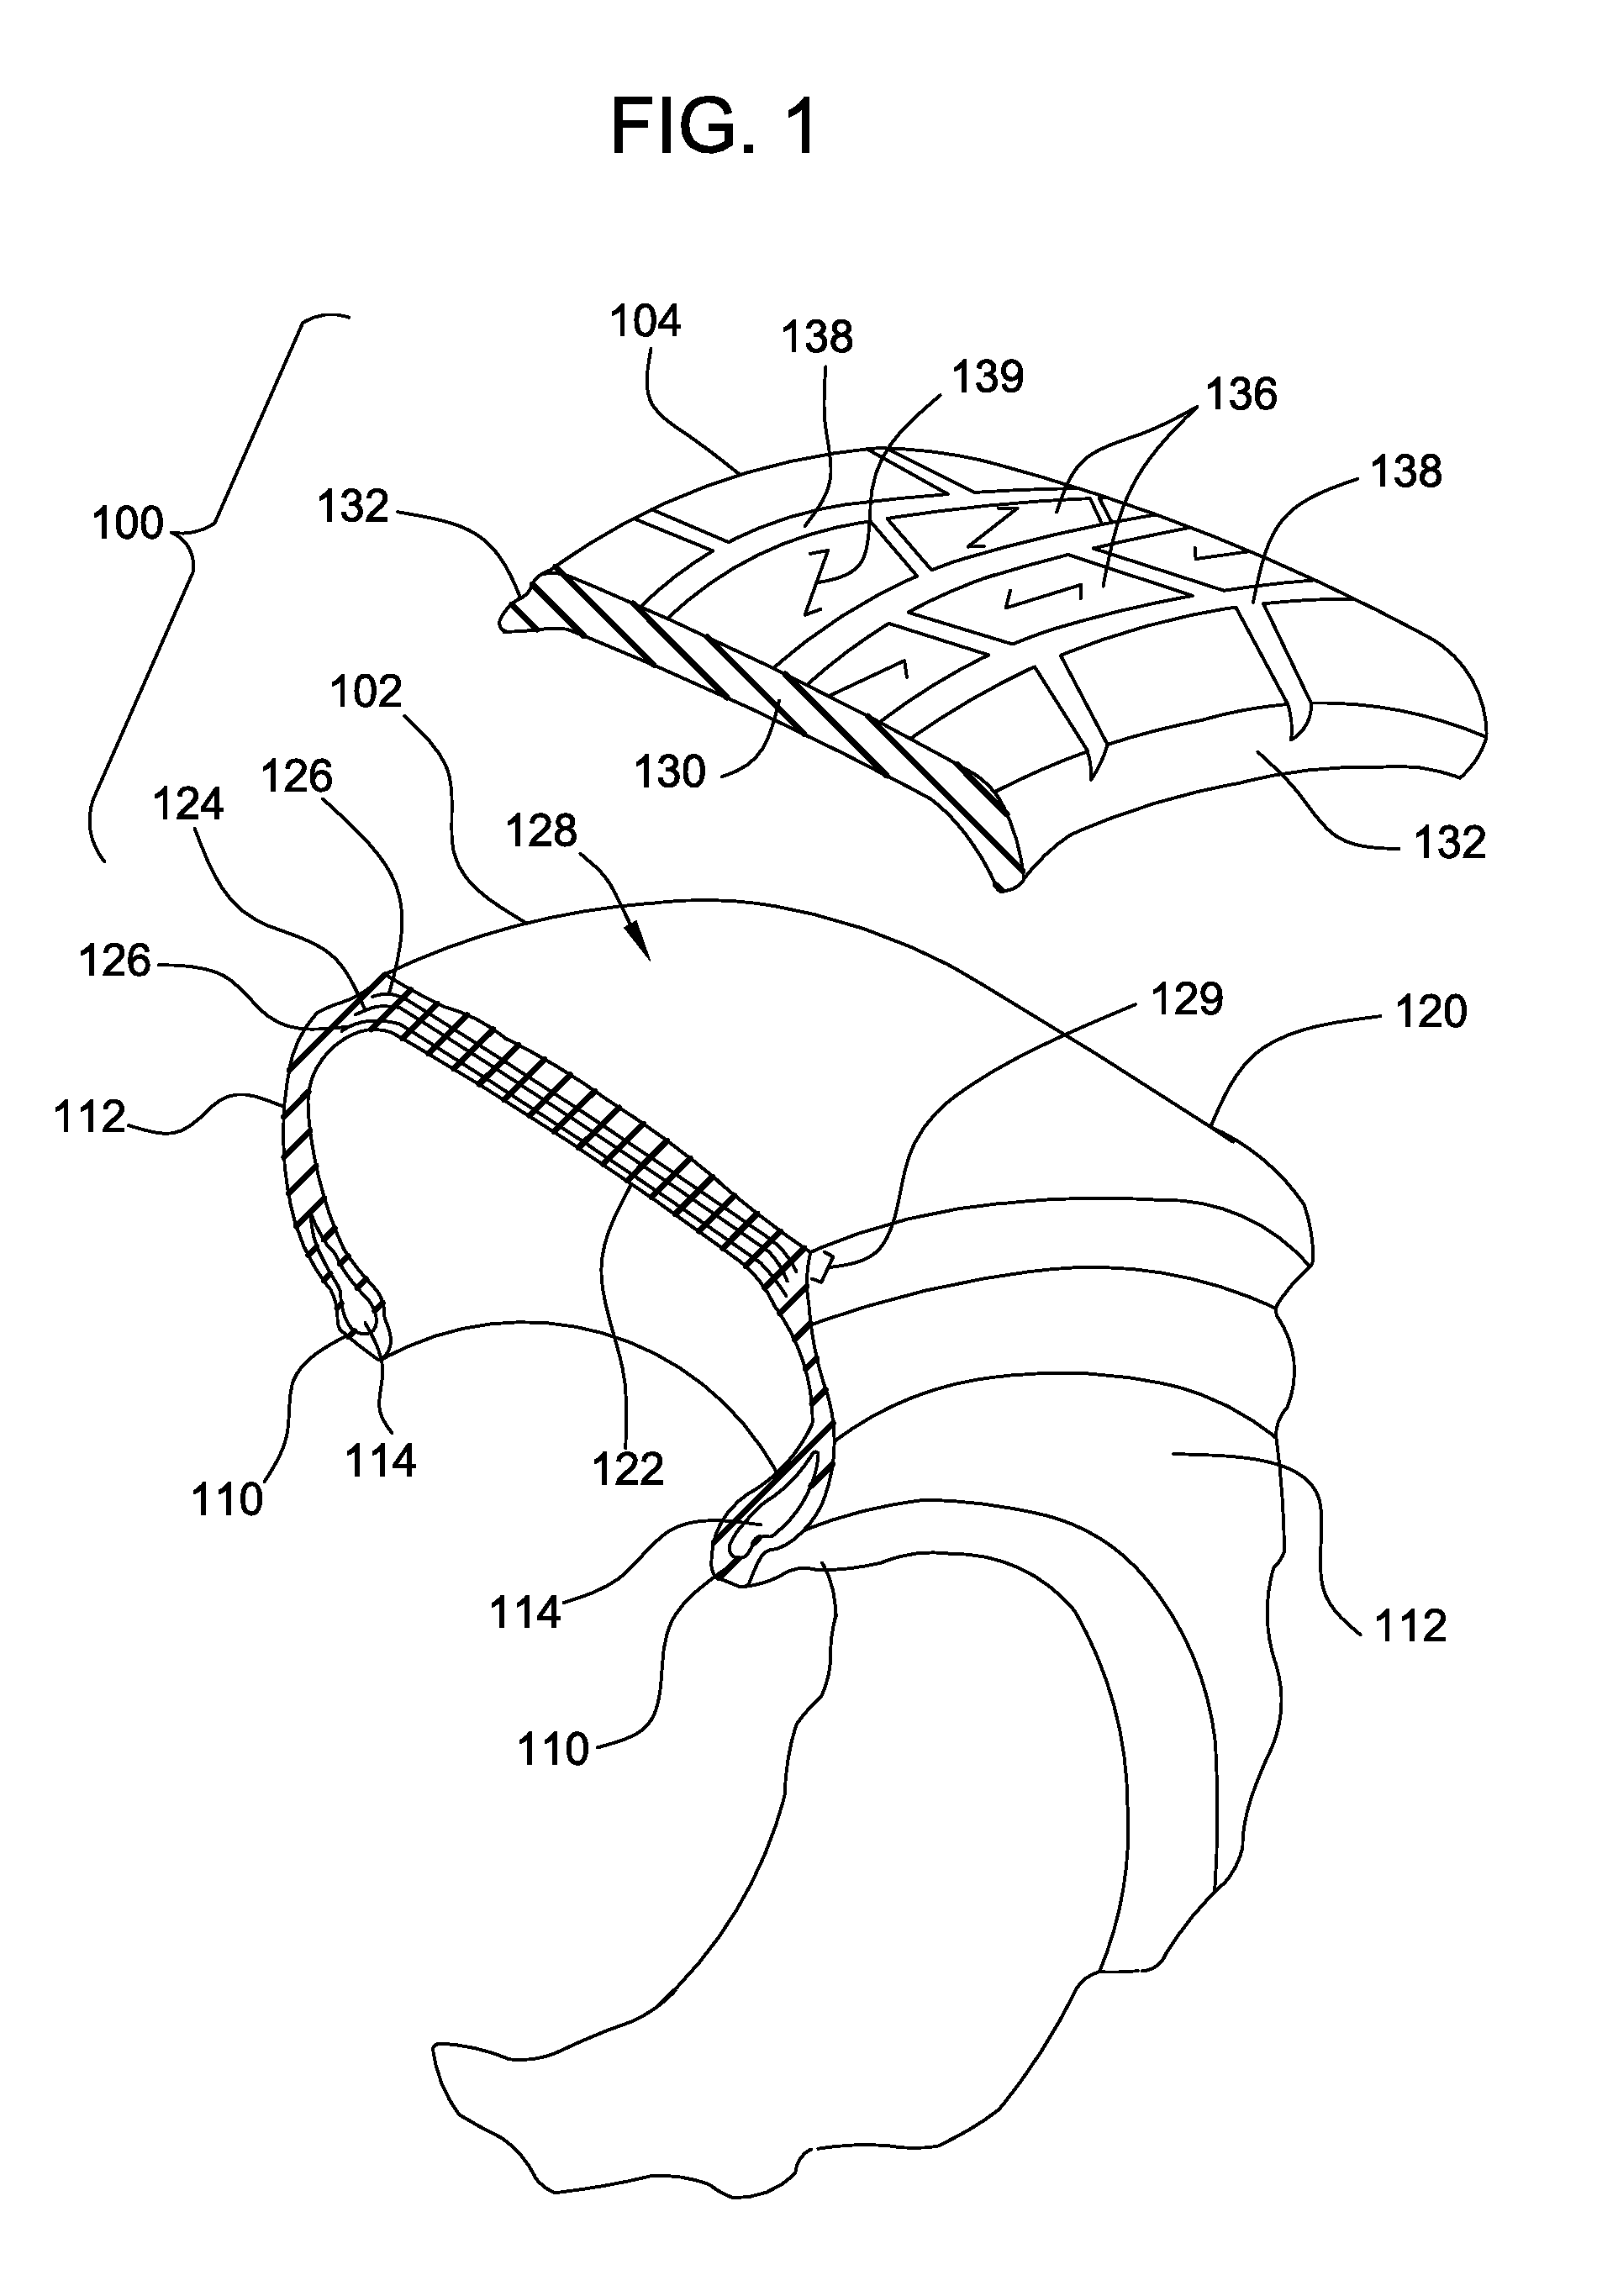 System and method for pricing, leasing, and transferring ownership of tires